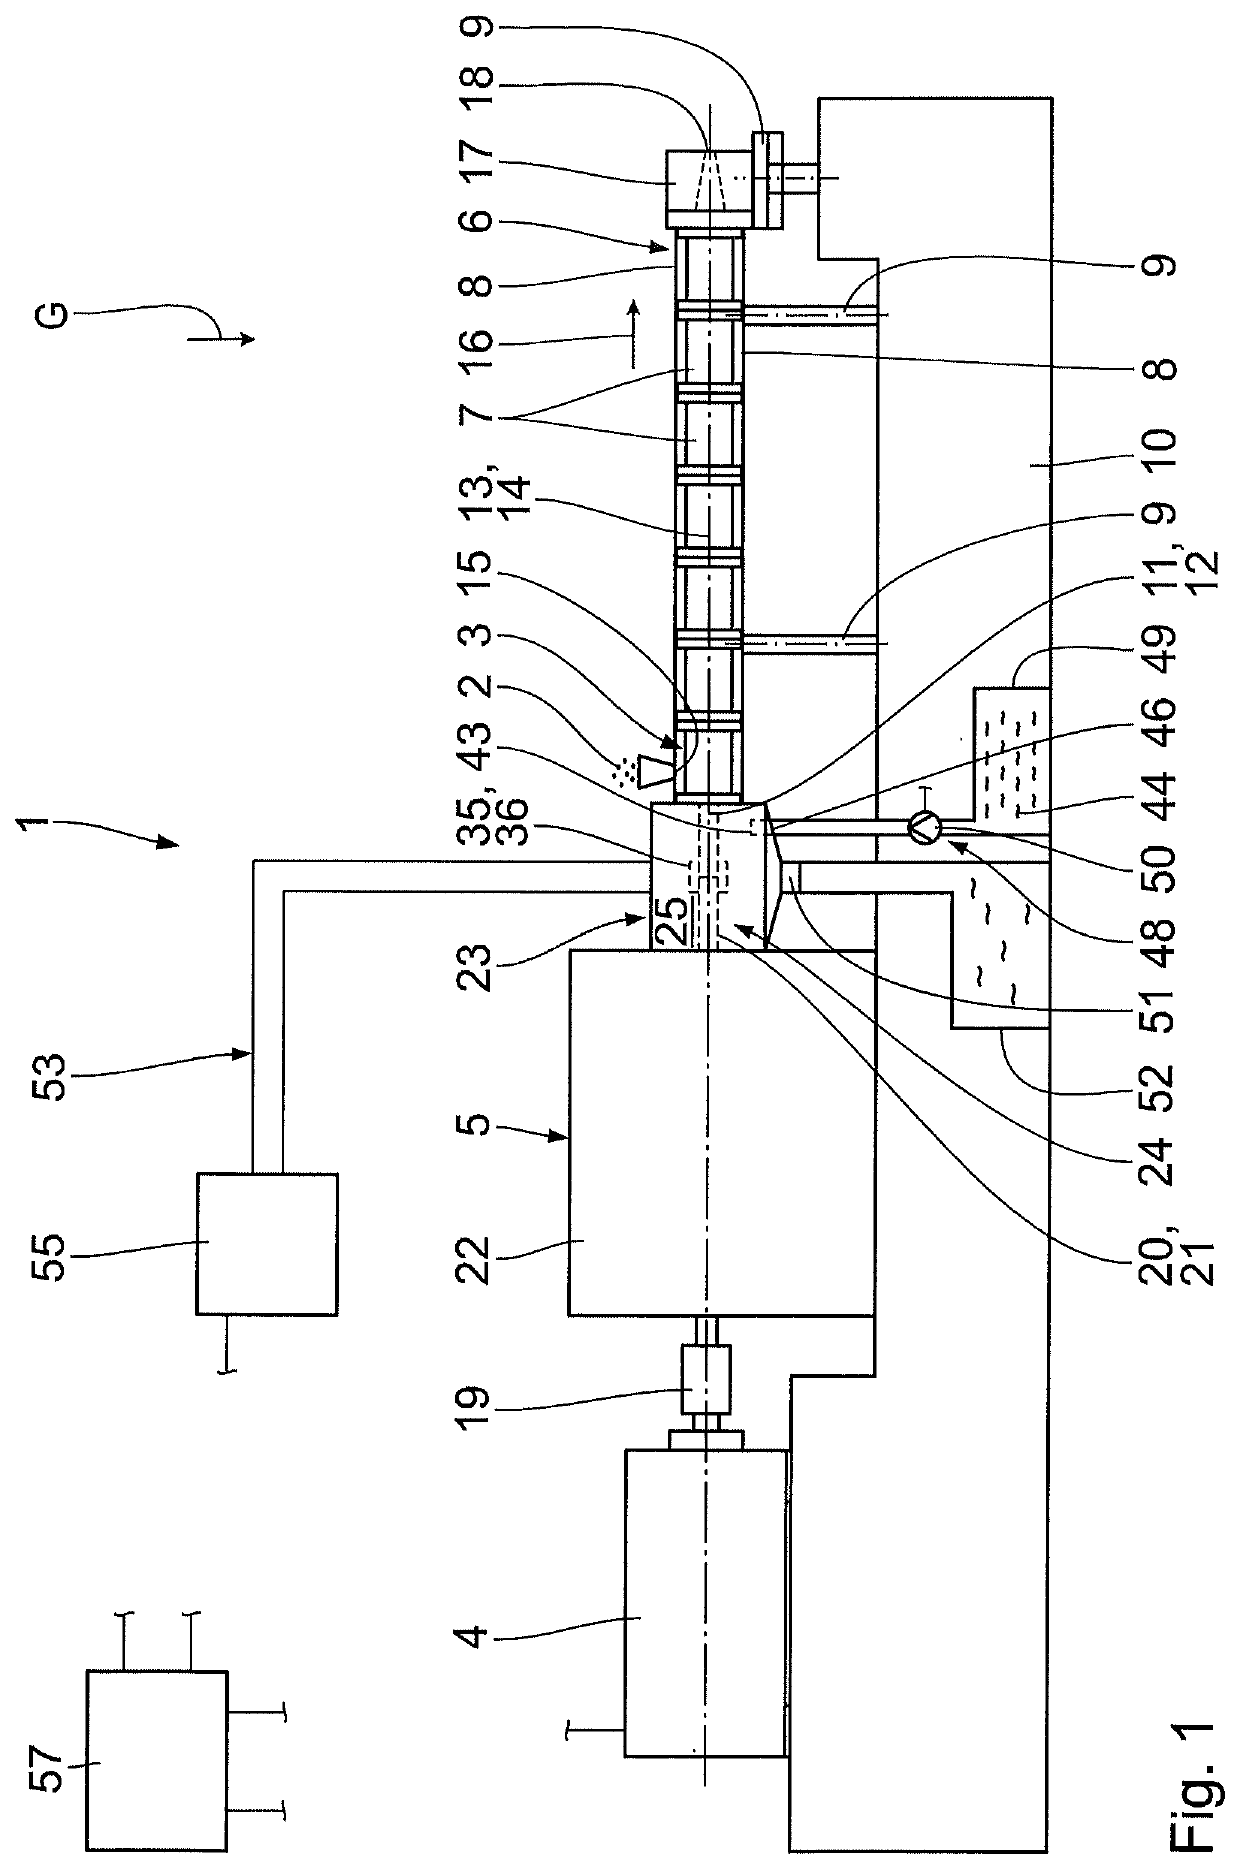 Connecting device for connecting a screw machine to a gear mechanism, and method for cleaning such a connecting device